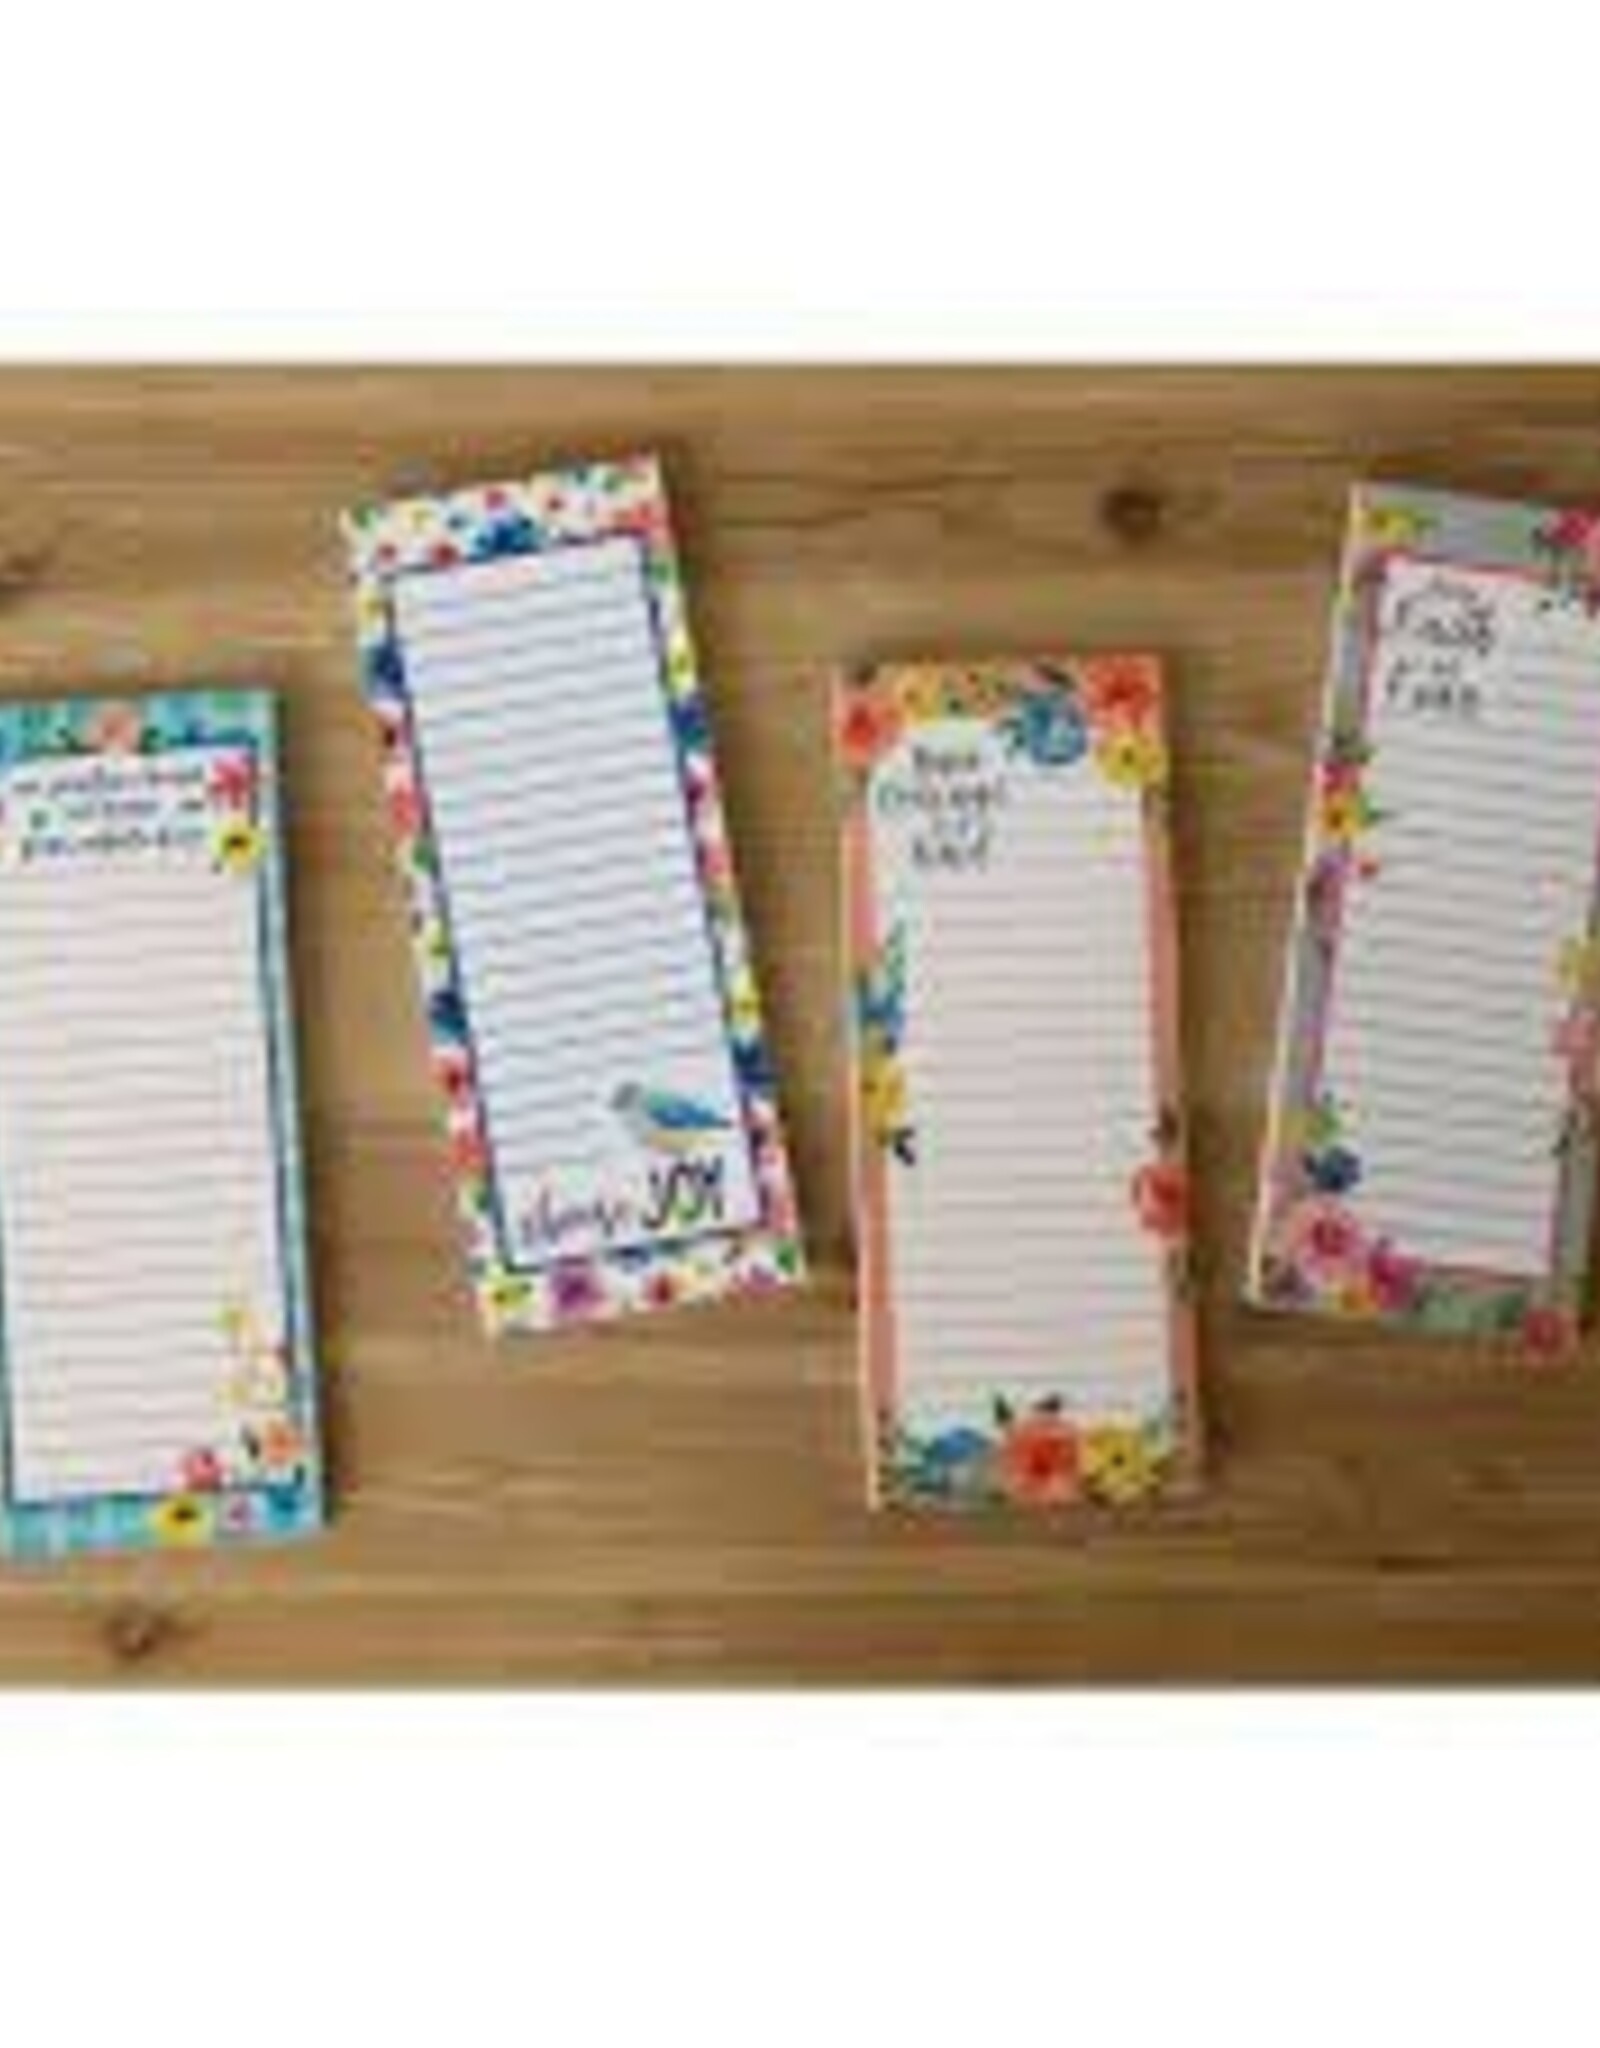 Home Goods Audrey's - Magnetic Notepad Inspirational Quotes Set of 4